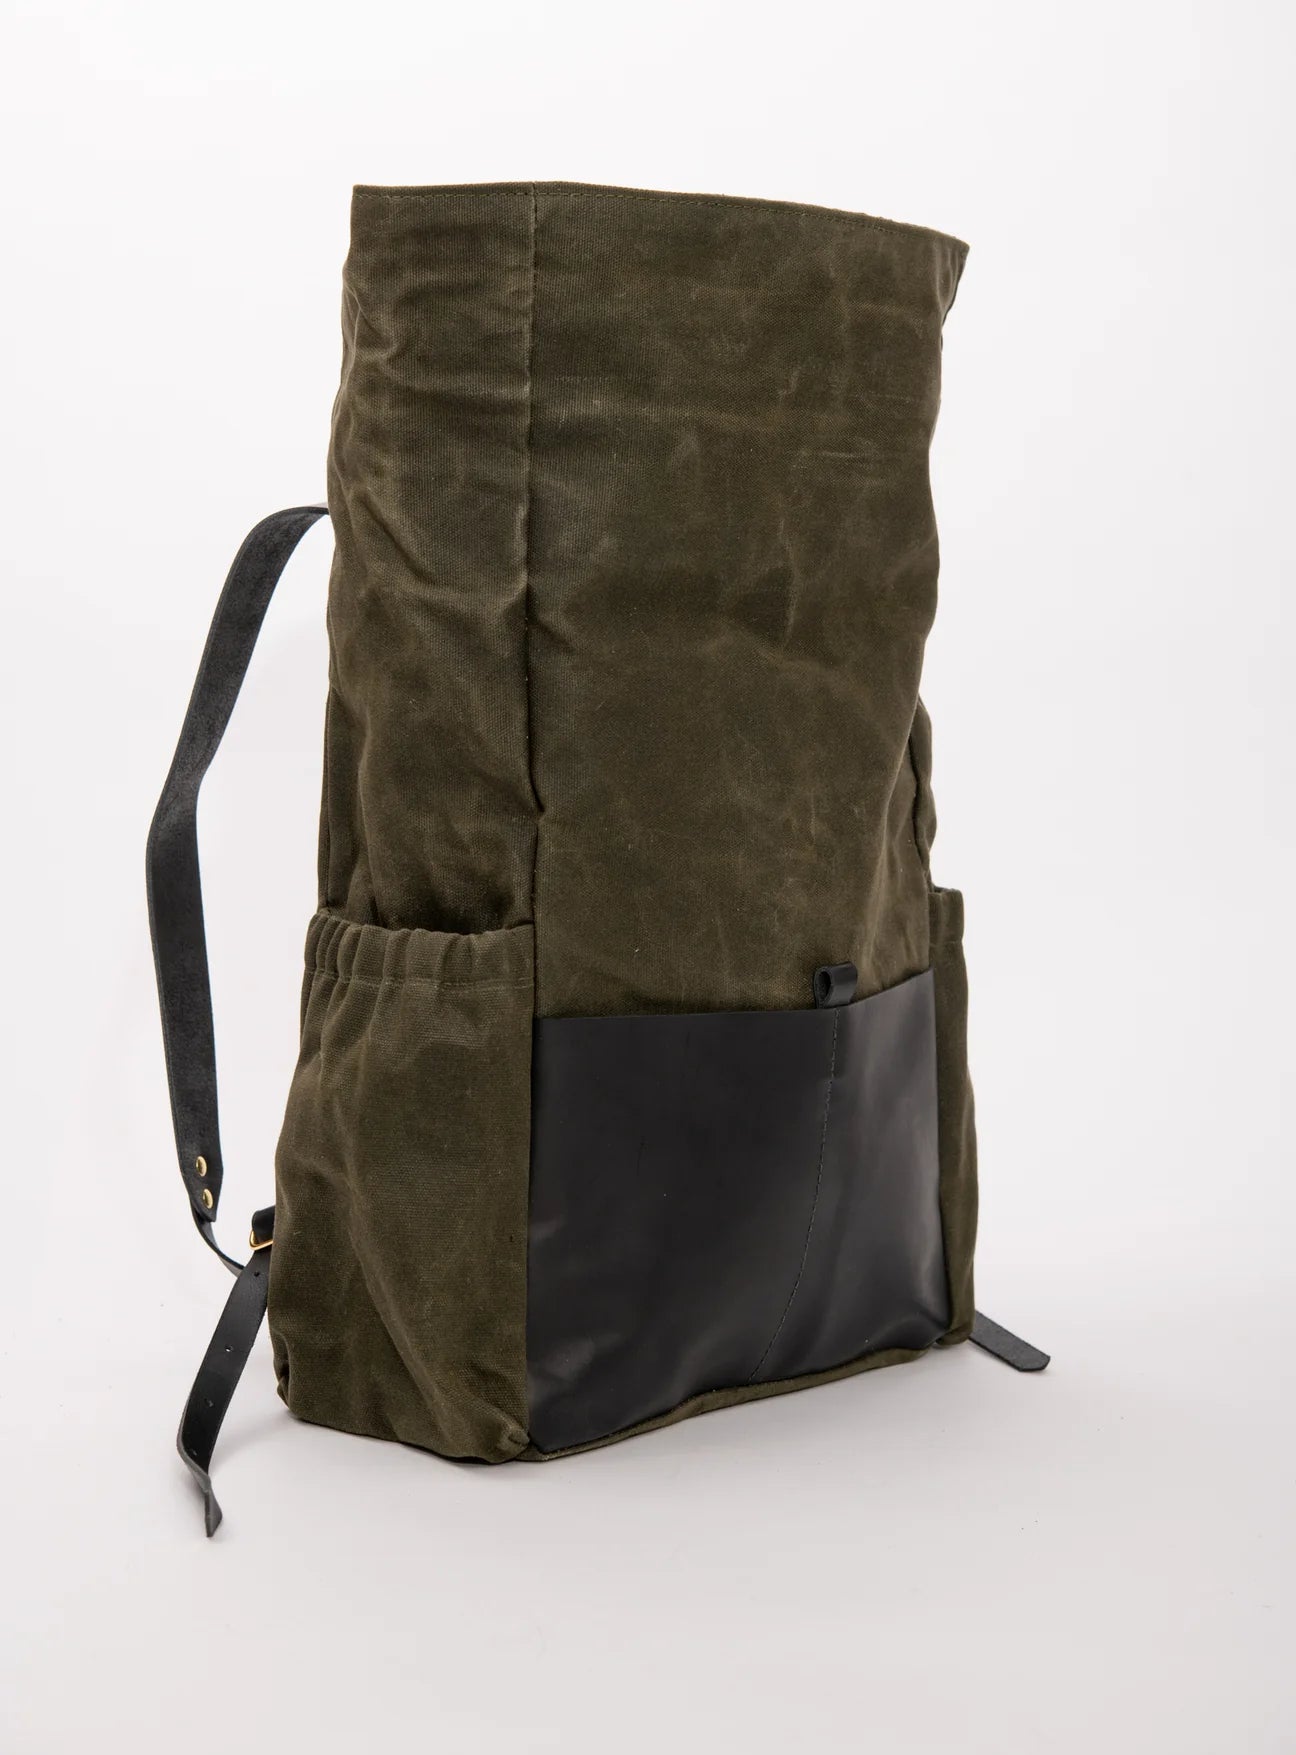 Roll Top Leather and Waxed Cotton Backpack, De Lorimier Model